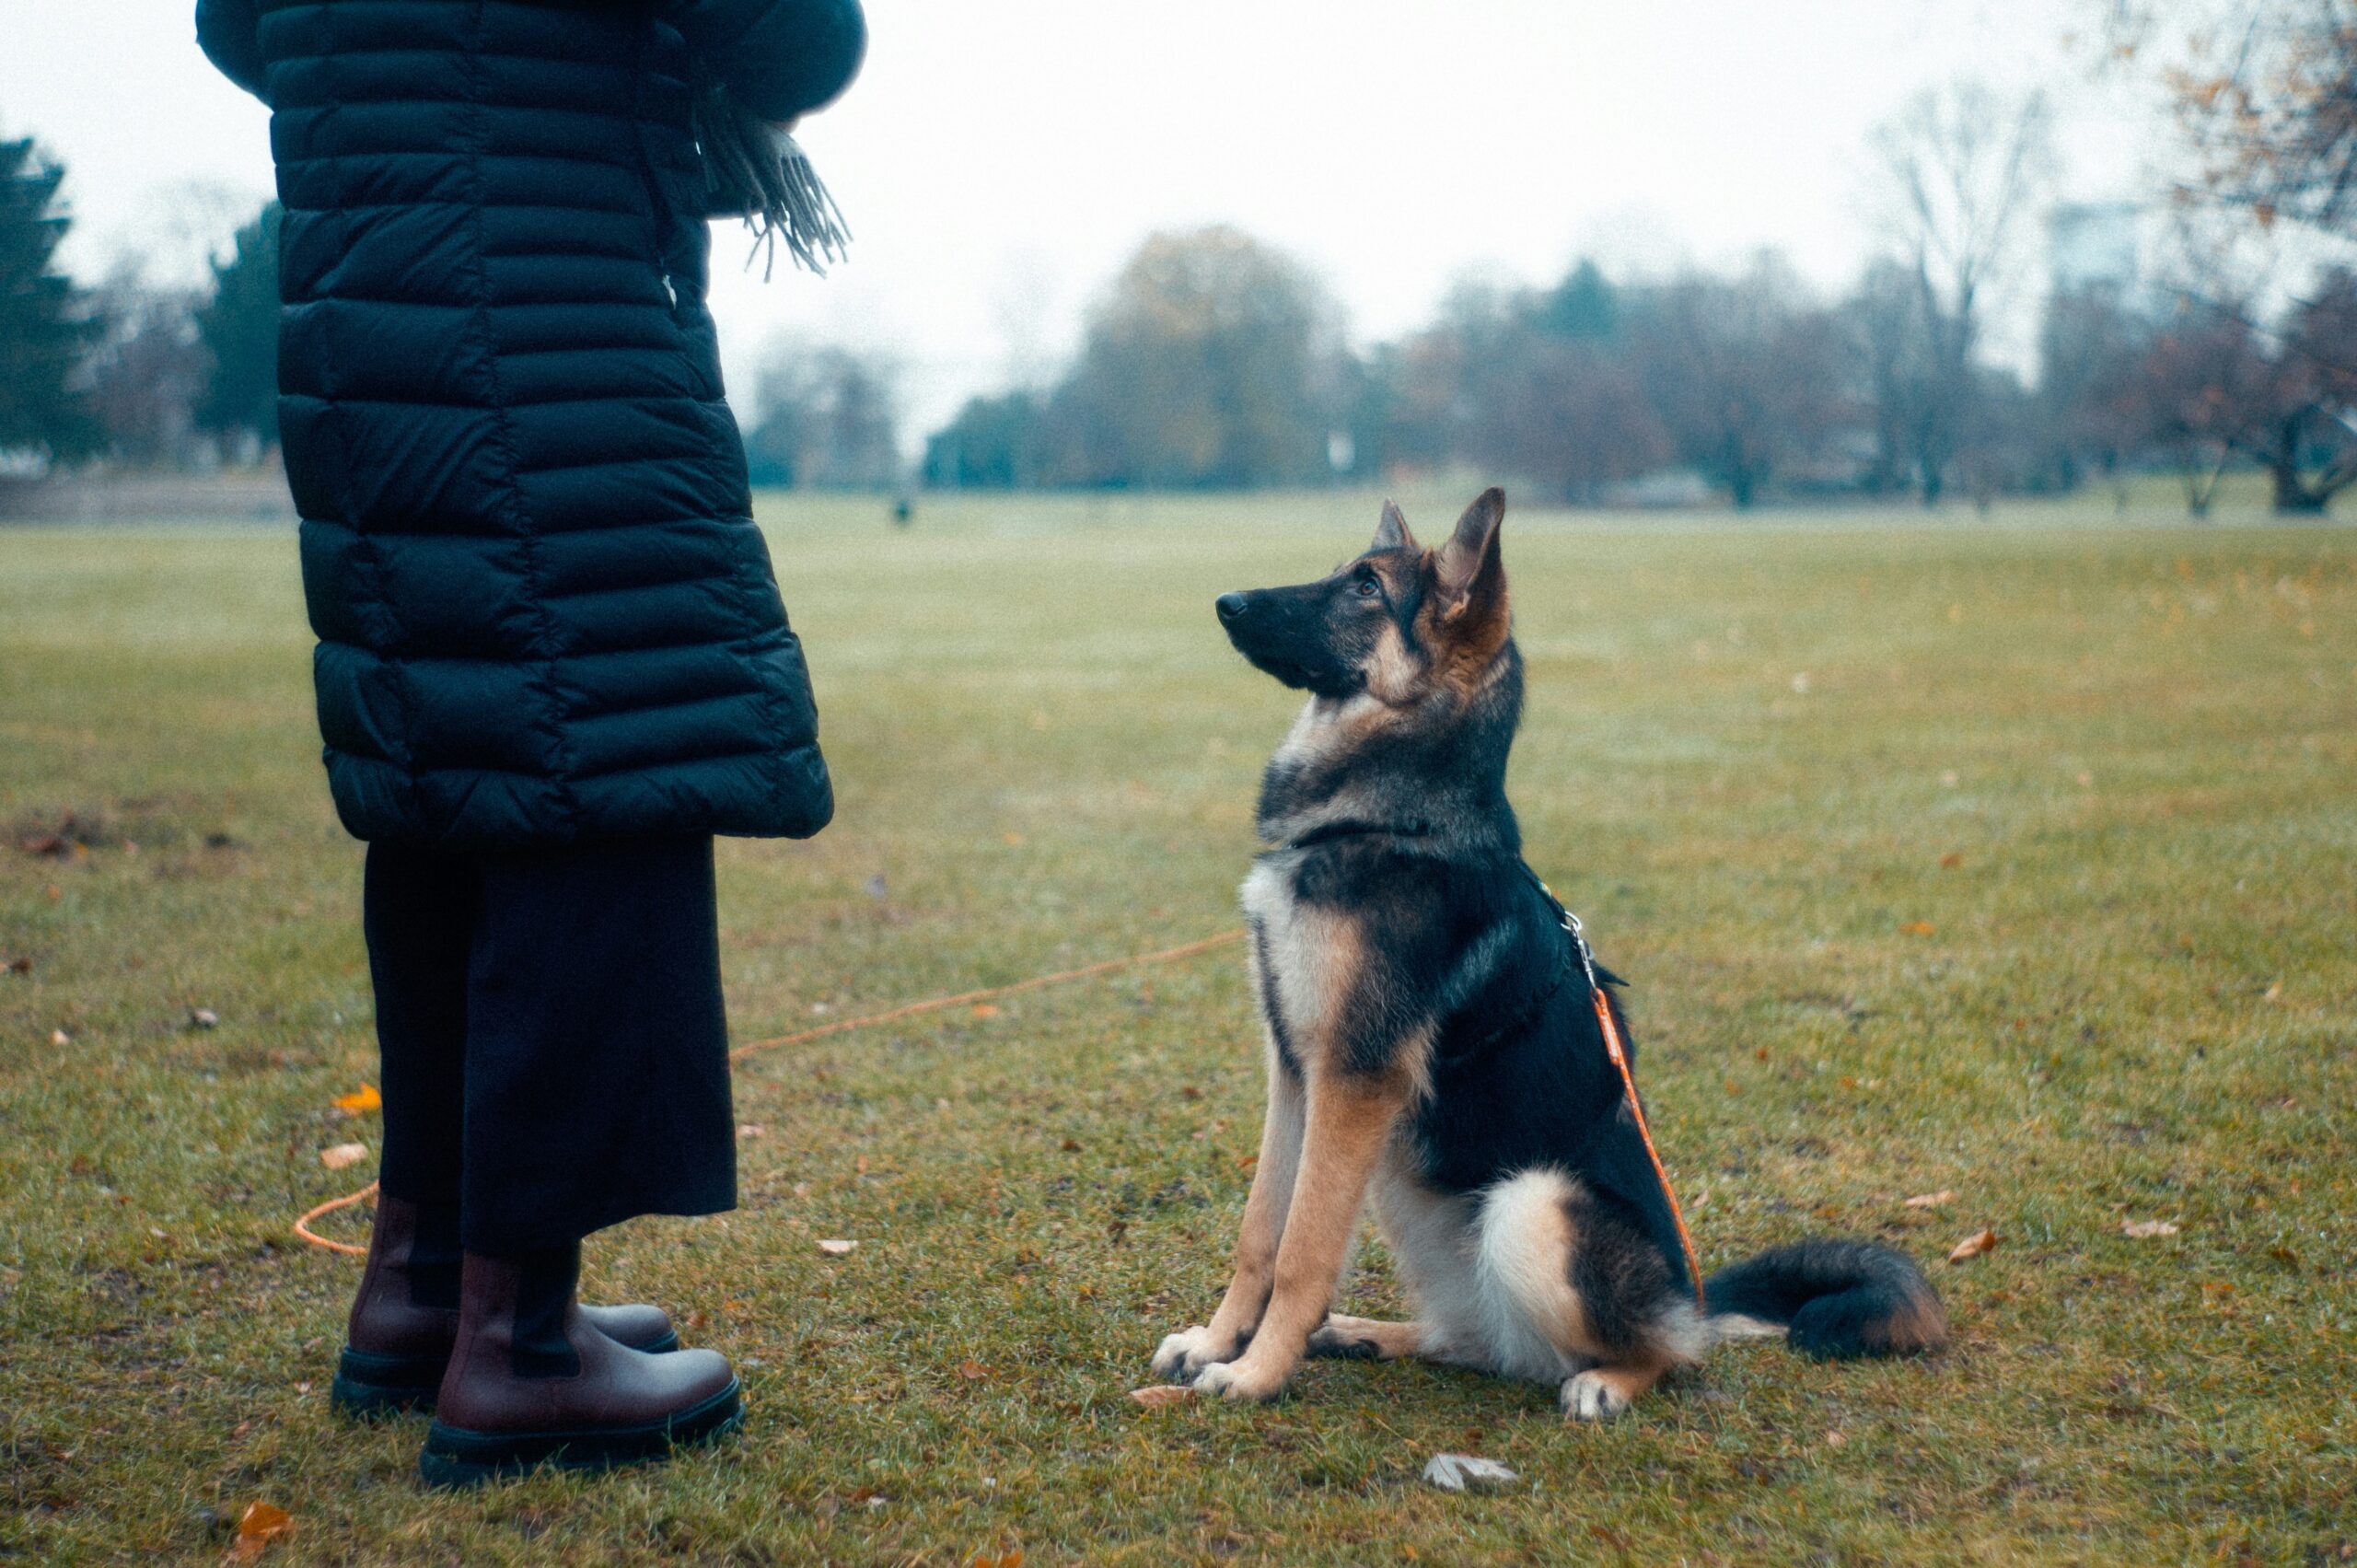 German shepherd being trained to ‘sit’ by its owner in a field